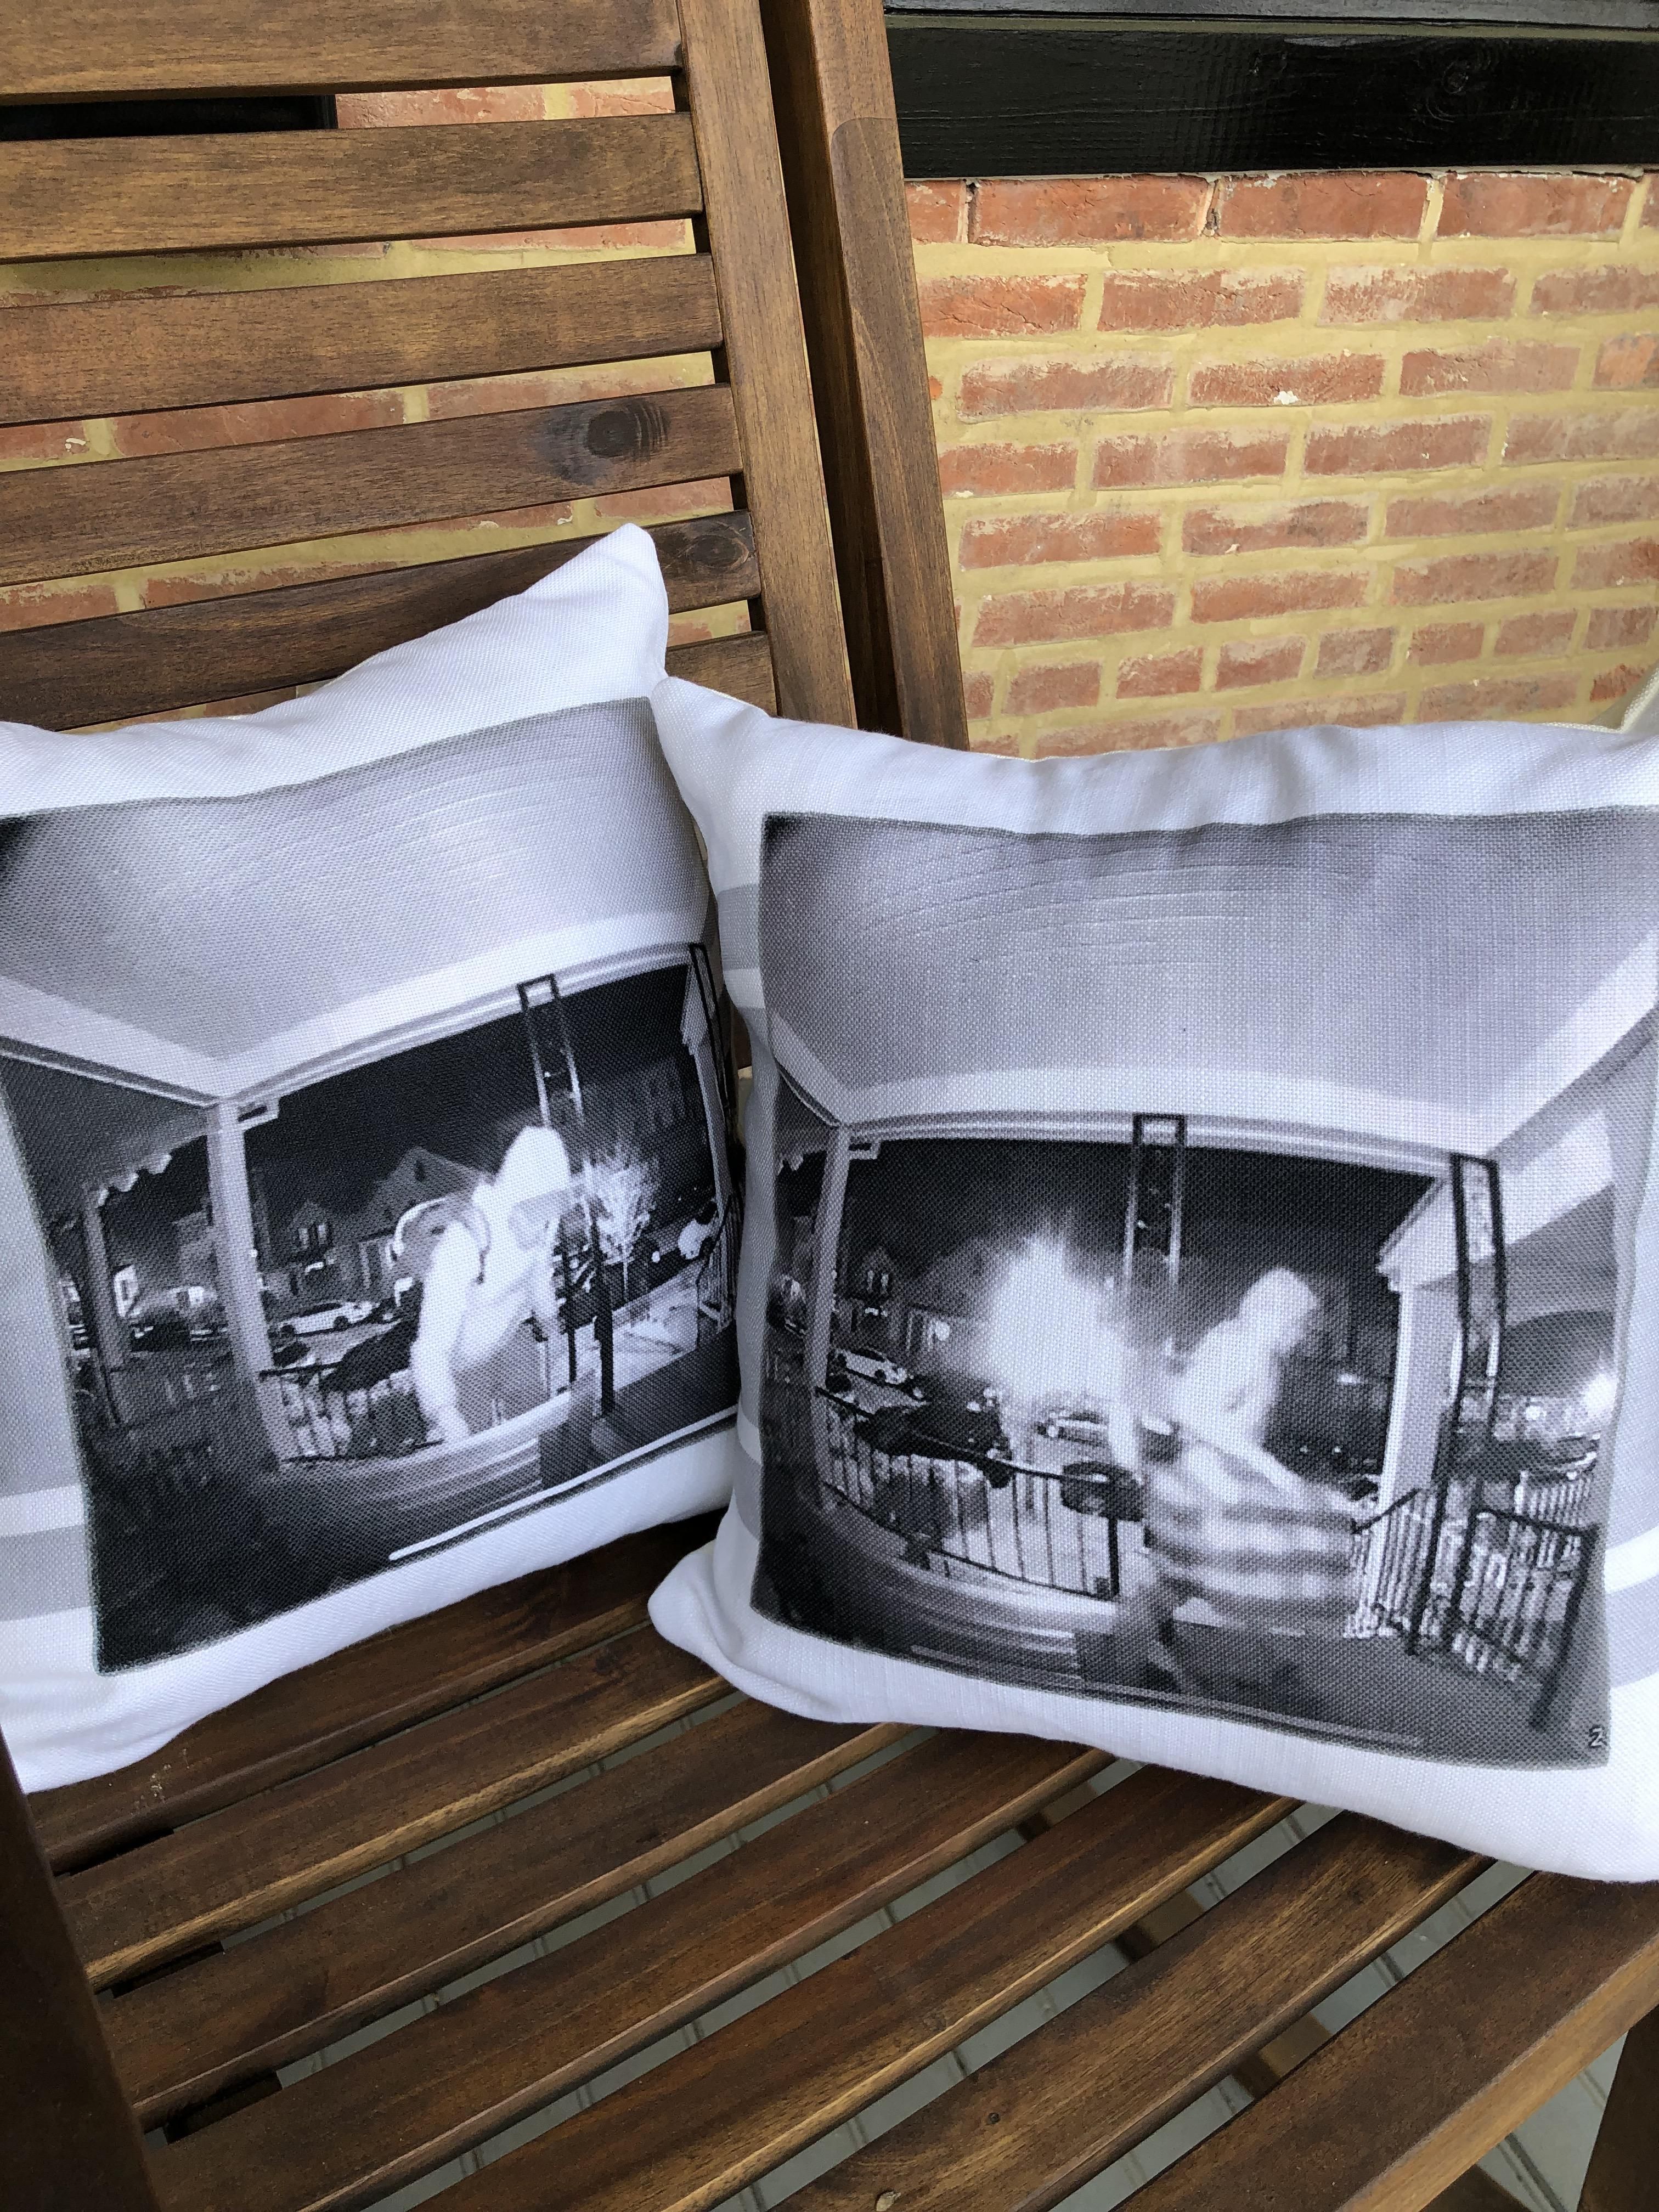 Someone stole pillows off our front porch so got some new ones.